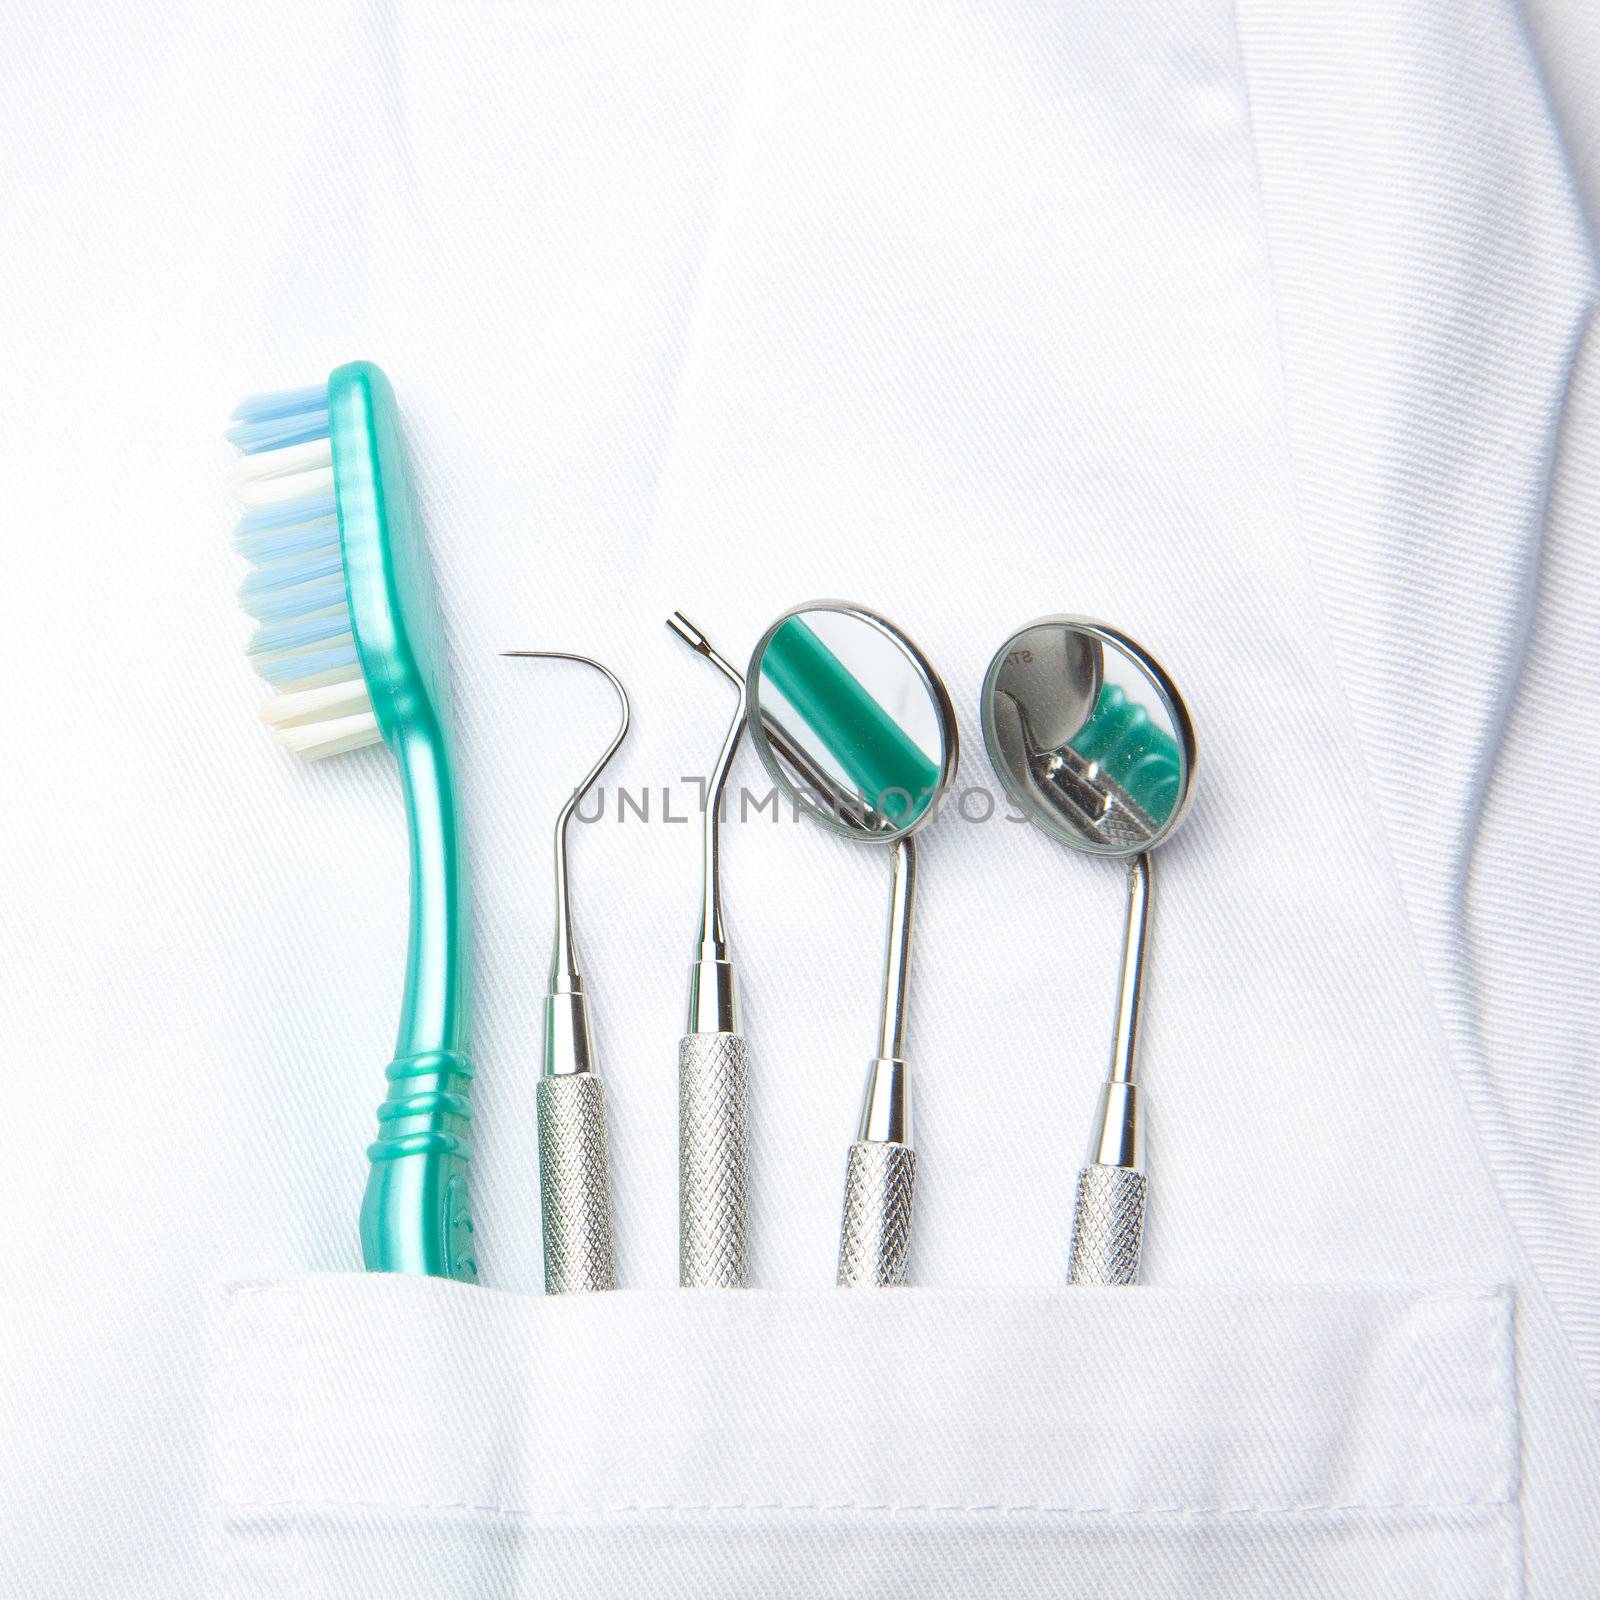 Dentist Pocket With Care Instruments by adamr